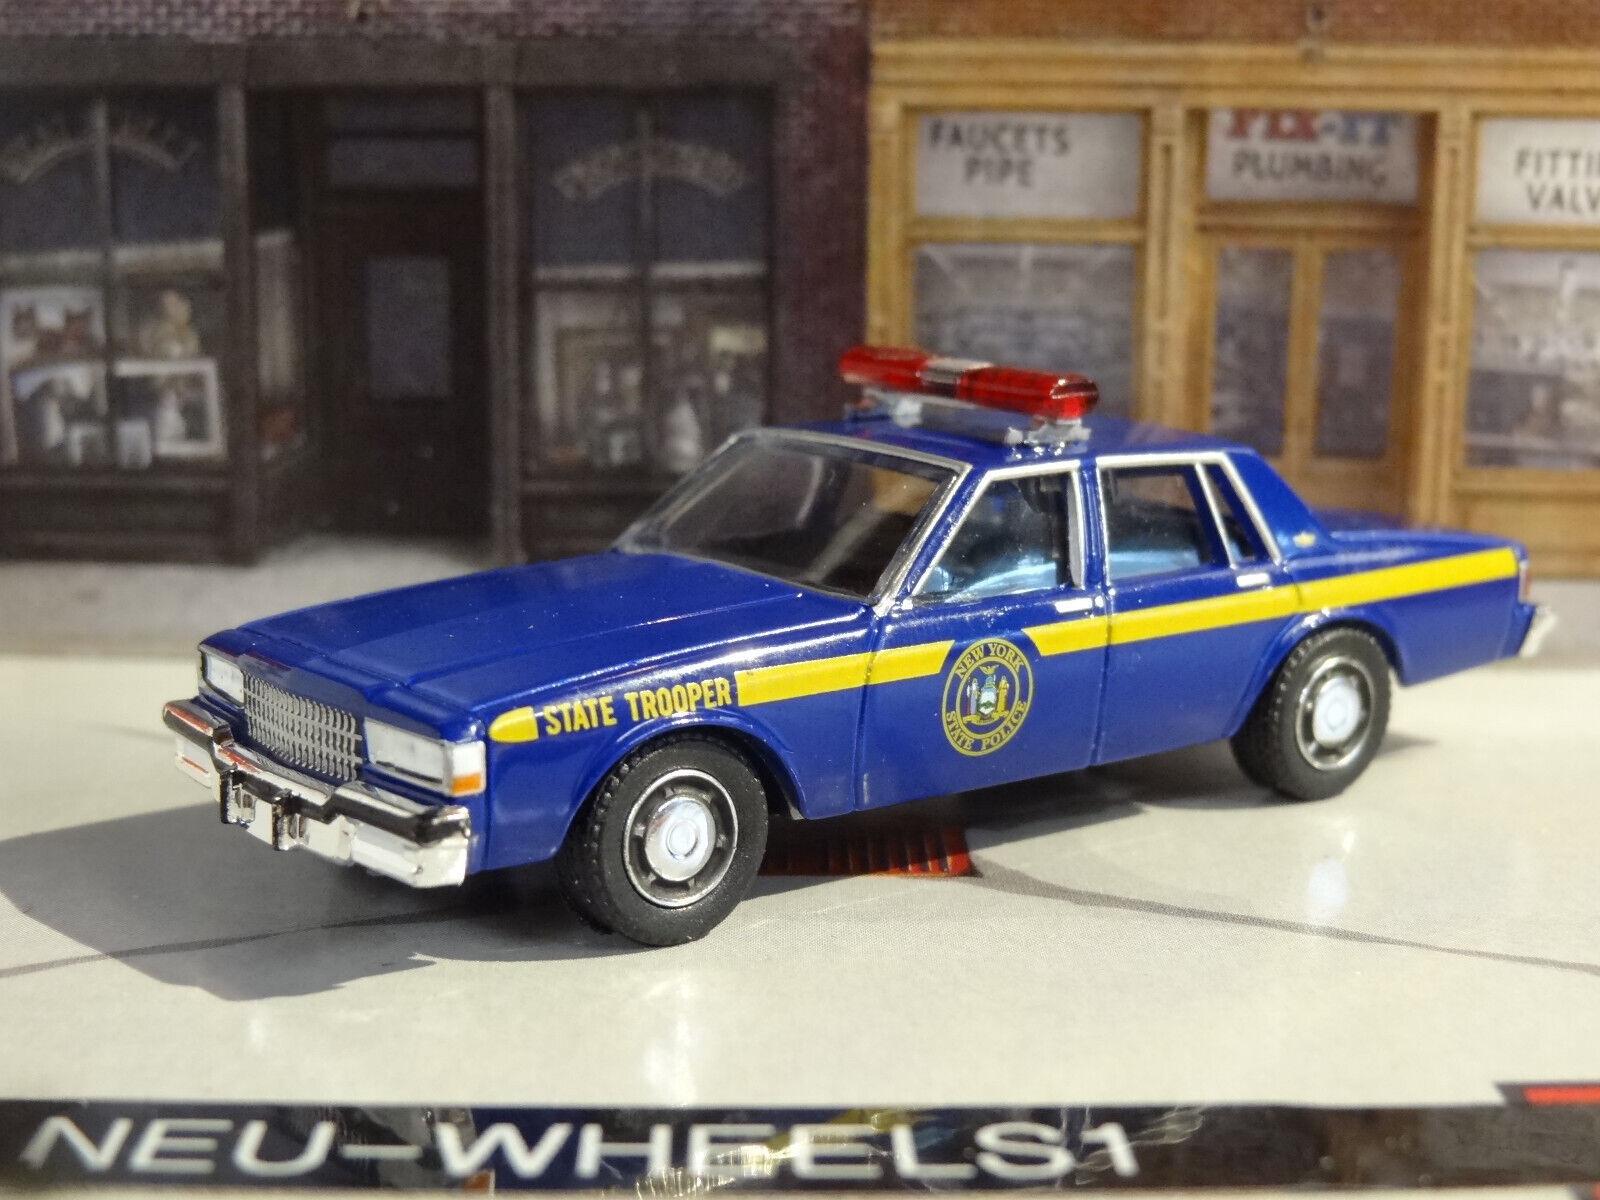 1986-90 CHEVY CAPRICE 9C1 NEW YORK STATE TROOPER 1/64 DIECAST DIORAMA MODEL A3